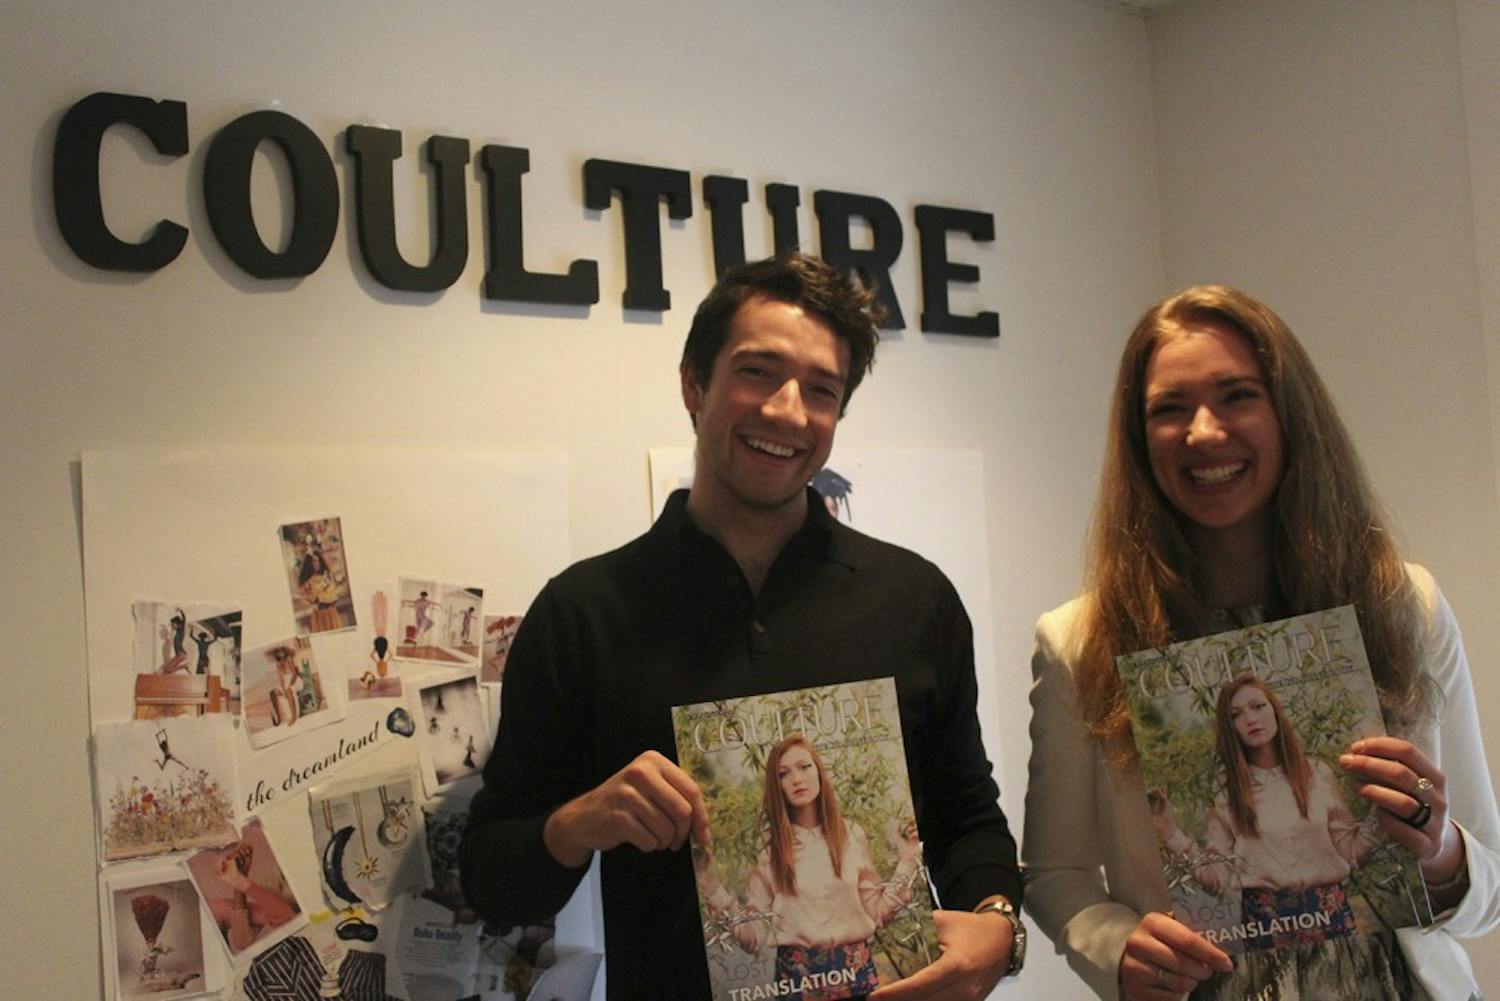 Coulture Magazine is a student-run fashion magazine printed once each semester. Here, co-founders Alexandra Hehlen and Remington Remmel pose for a picture in their new office at 145 Franklin St.